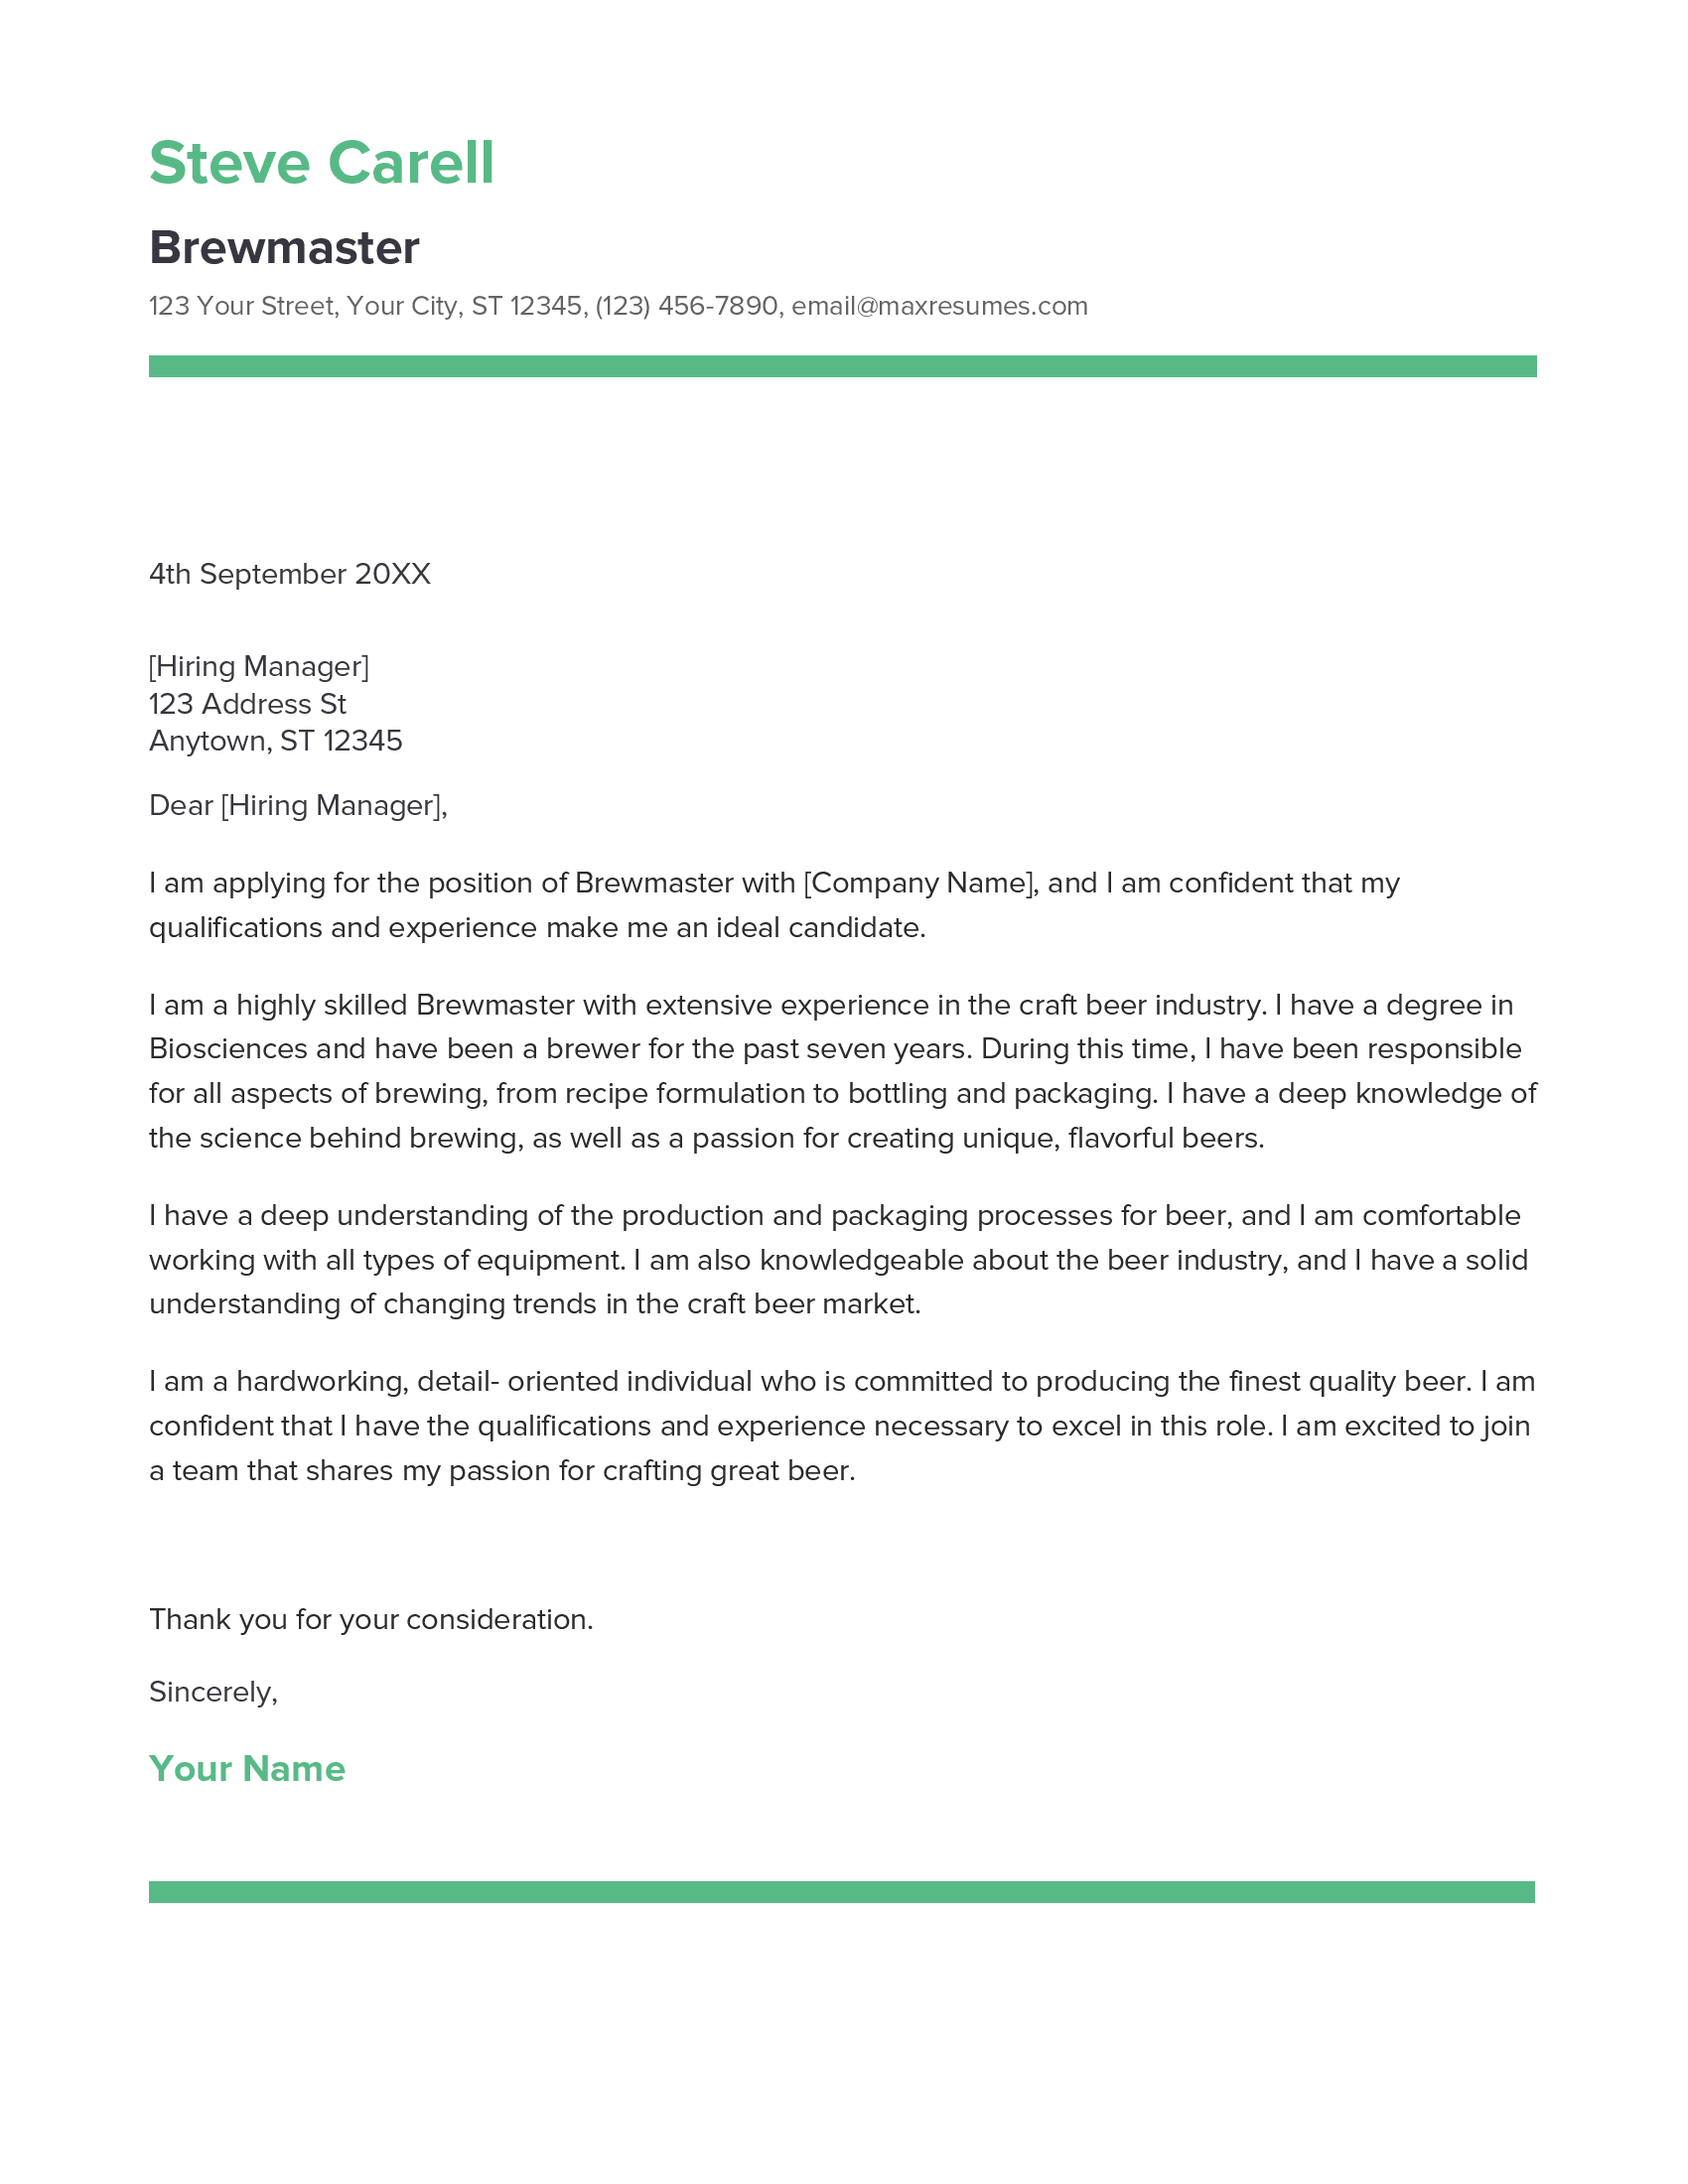 Brewmaster Cover Letter Example